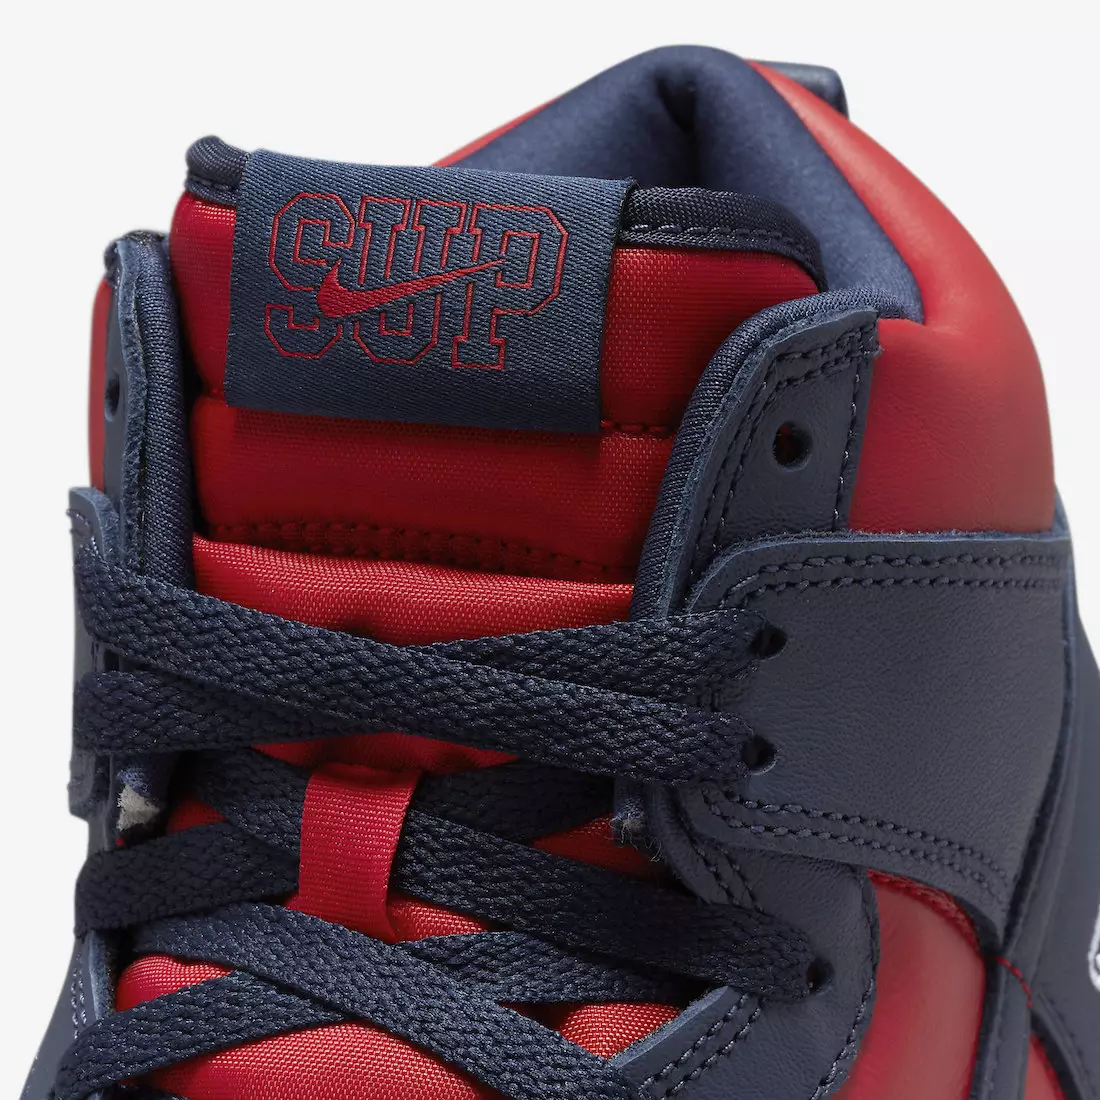 Supreme Nike SB Dunk High By Any Means Navy Red N3741-600 Data e publikimit